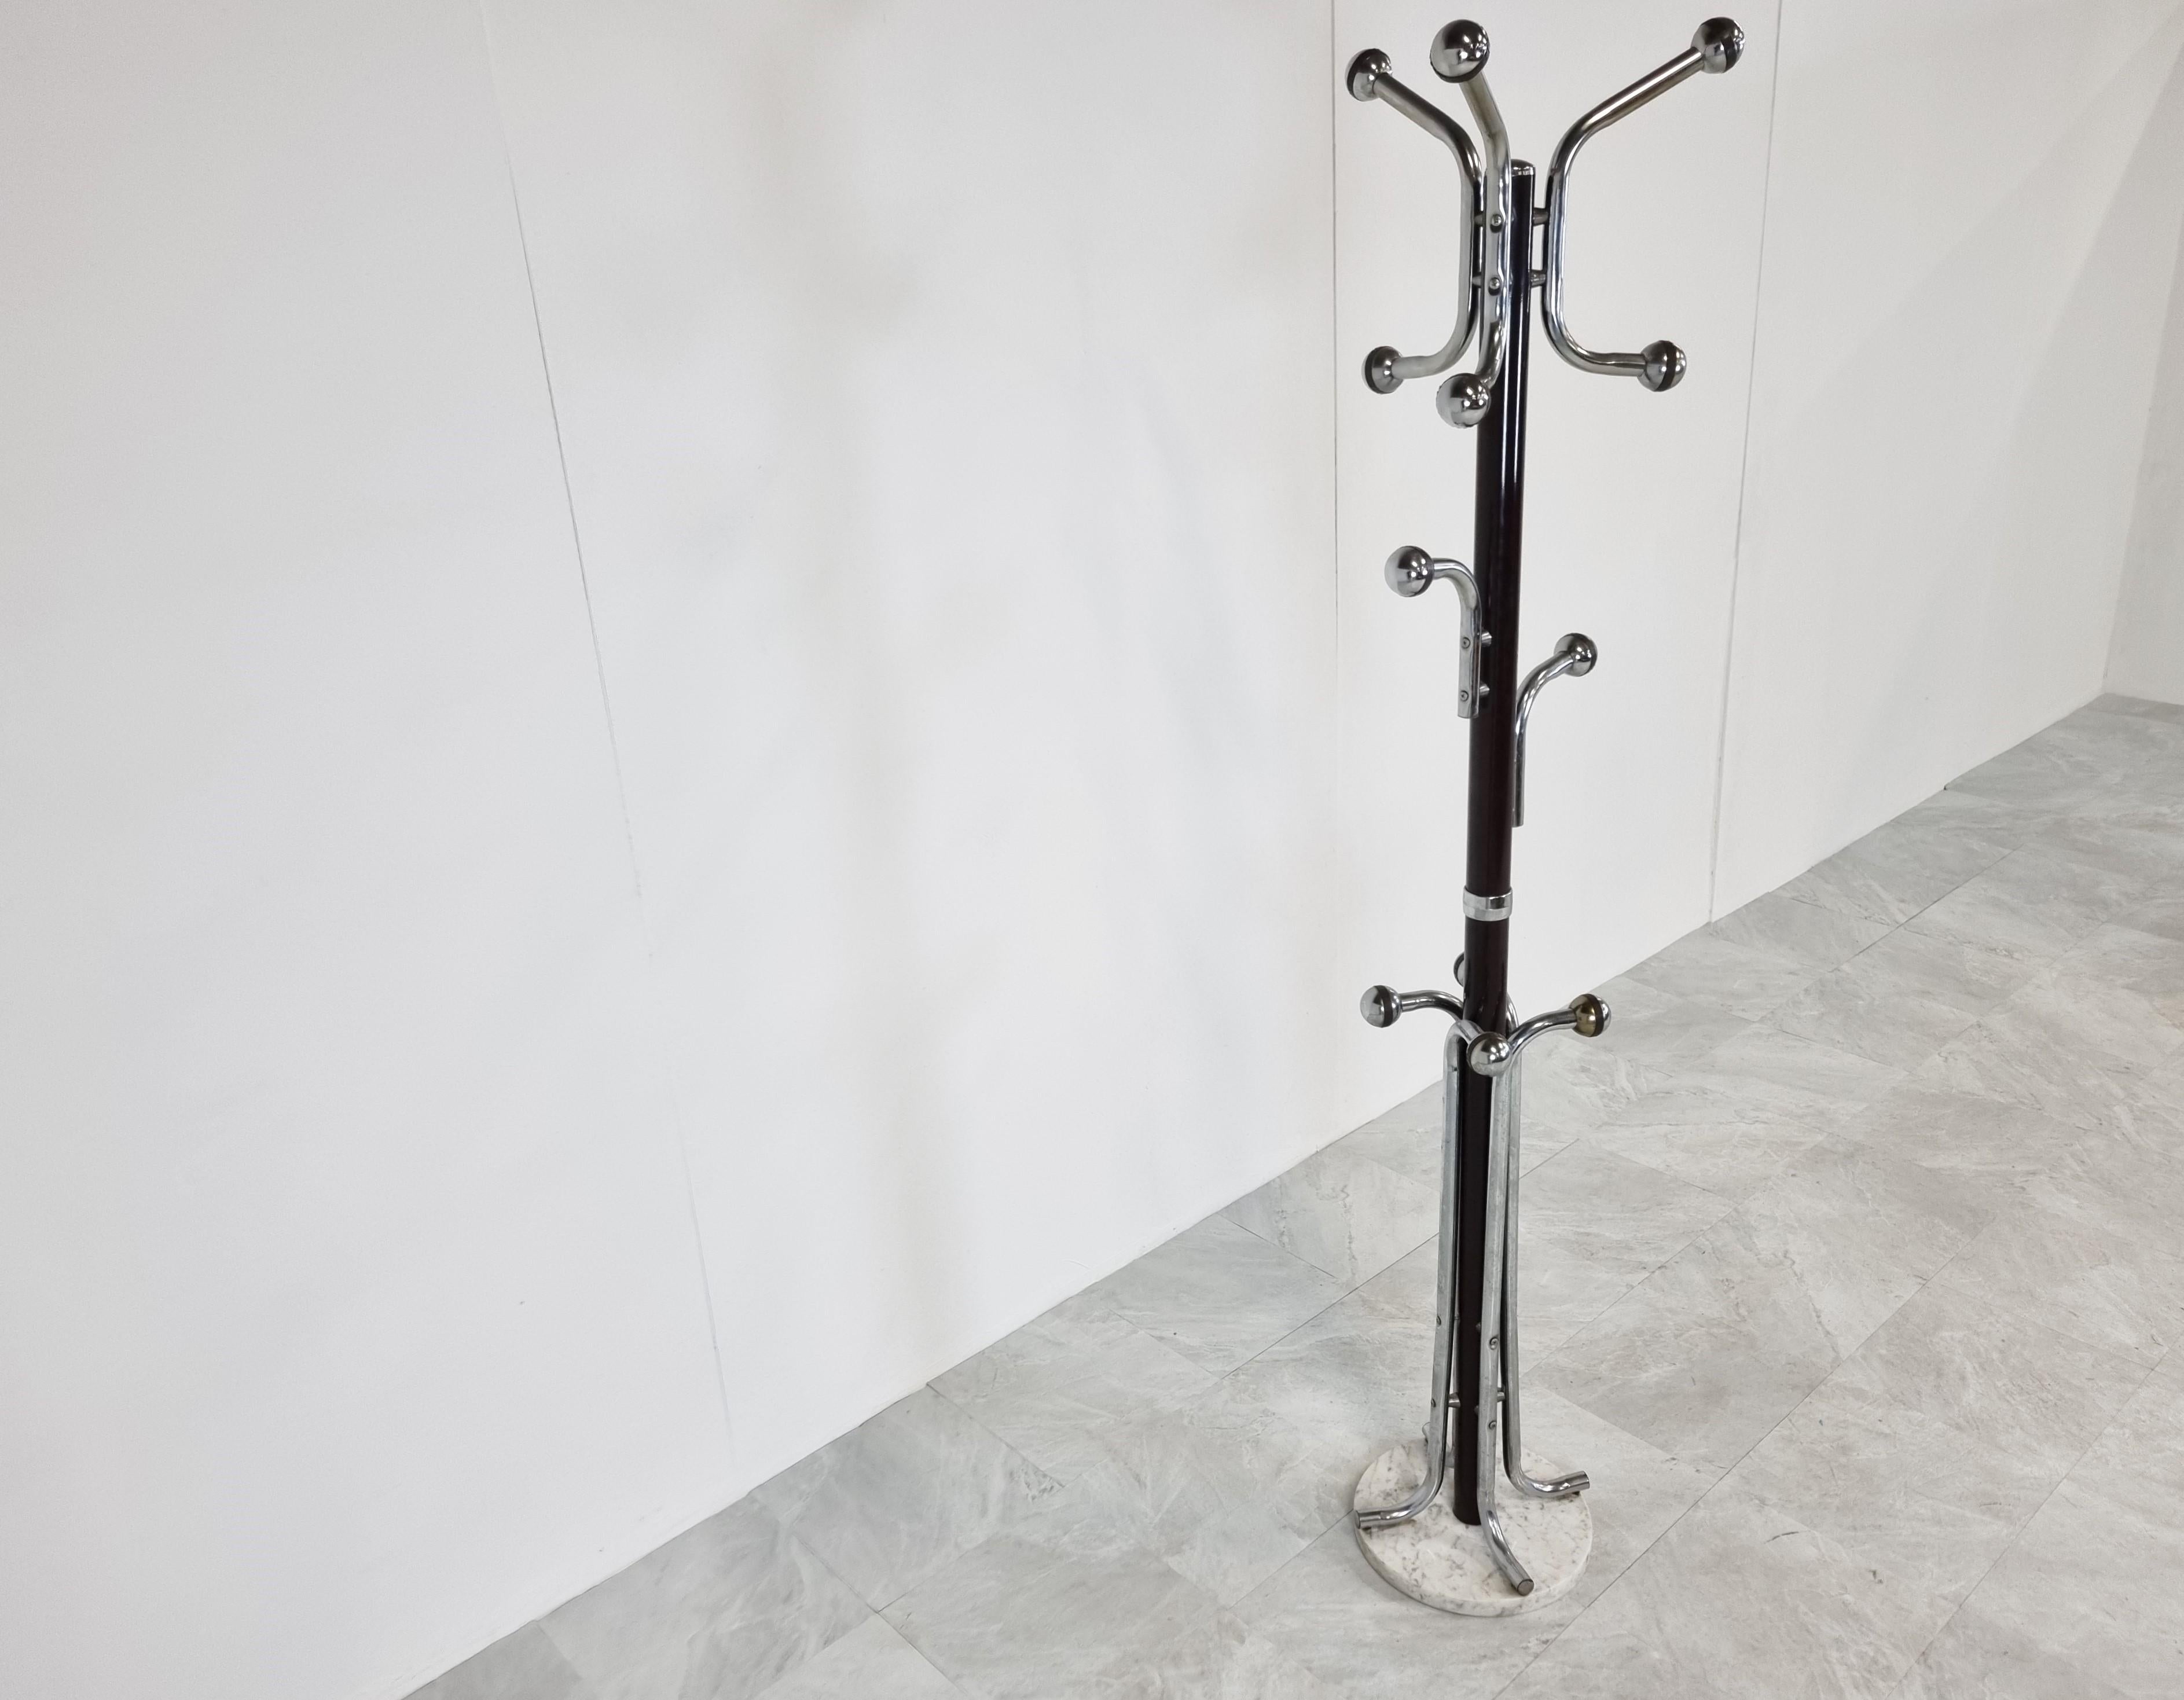 Mid century chrome and blacquered metal sputnik coat stand.

Space age design.

Lots of practical hooks and white marble base

1960s - France

Good condition.

Dimensions:
Height: 173cm/68.11